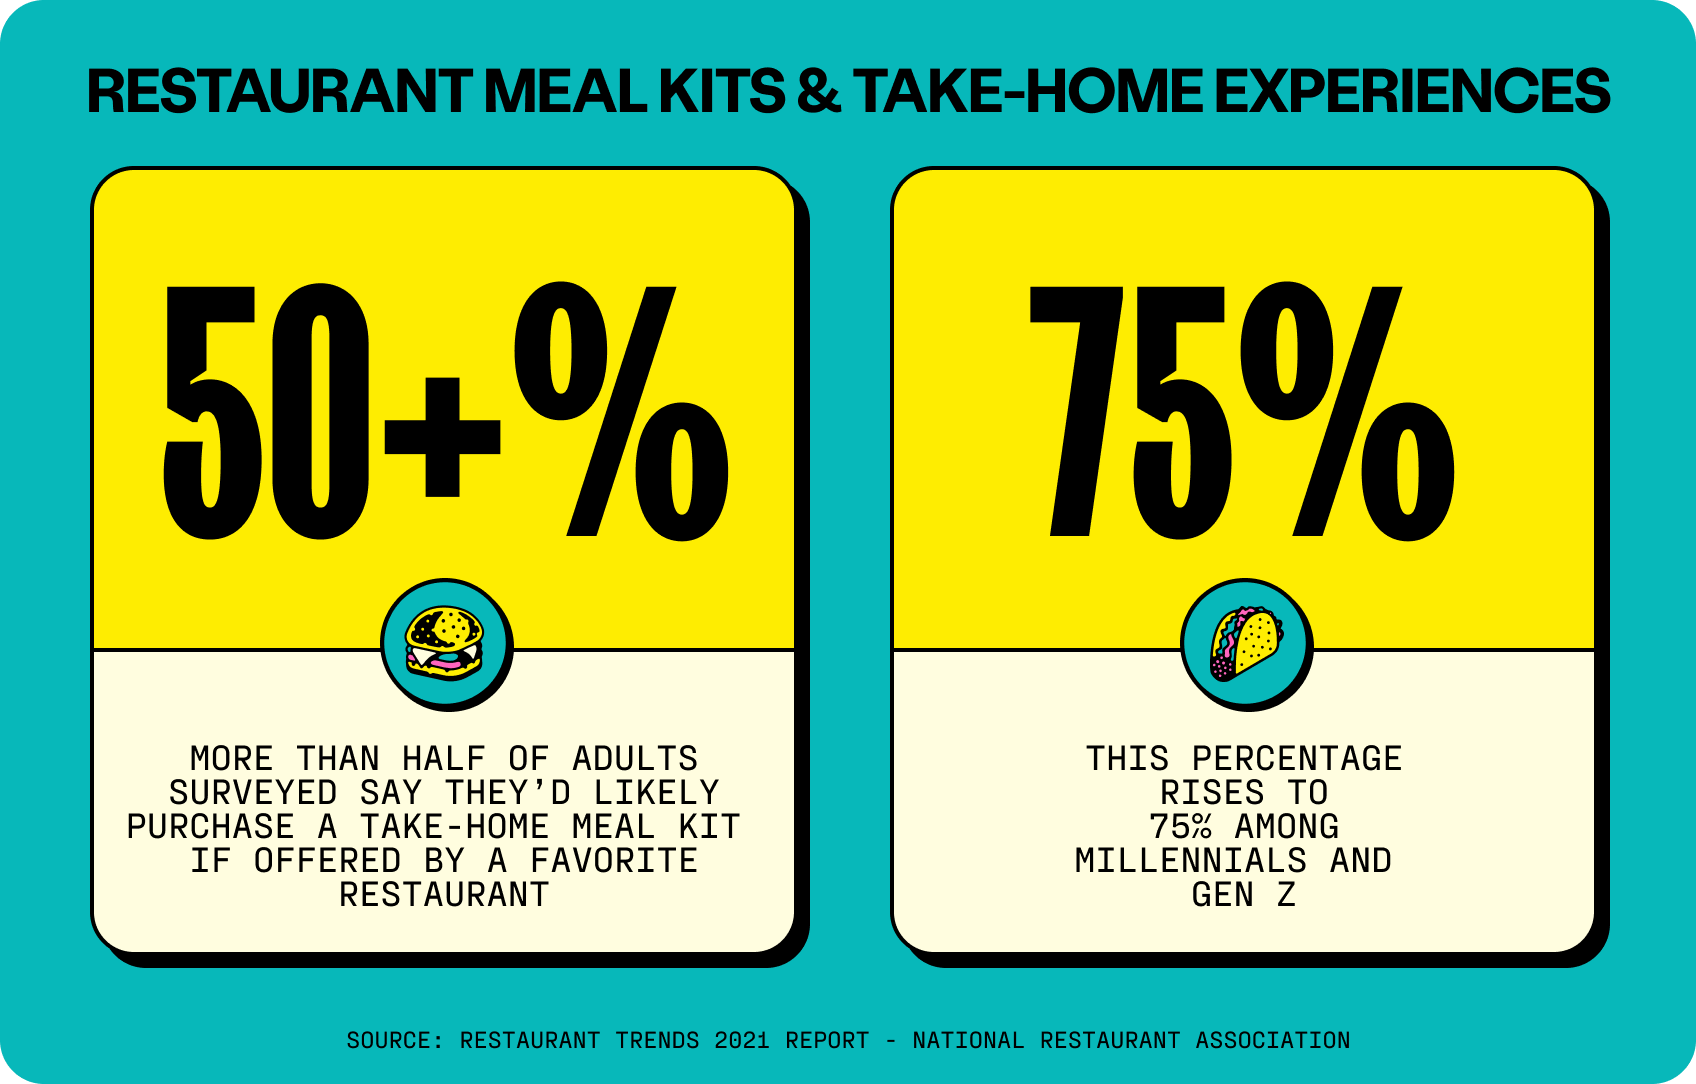 Restaurant meal kits and take-hoe experiences are popular among all age groups.